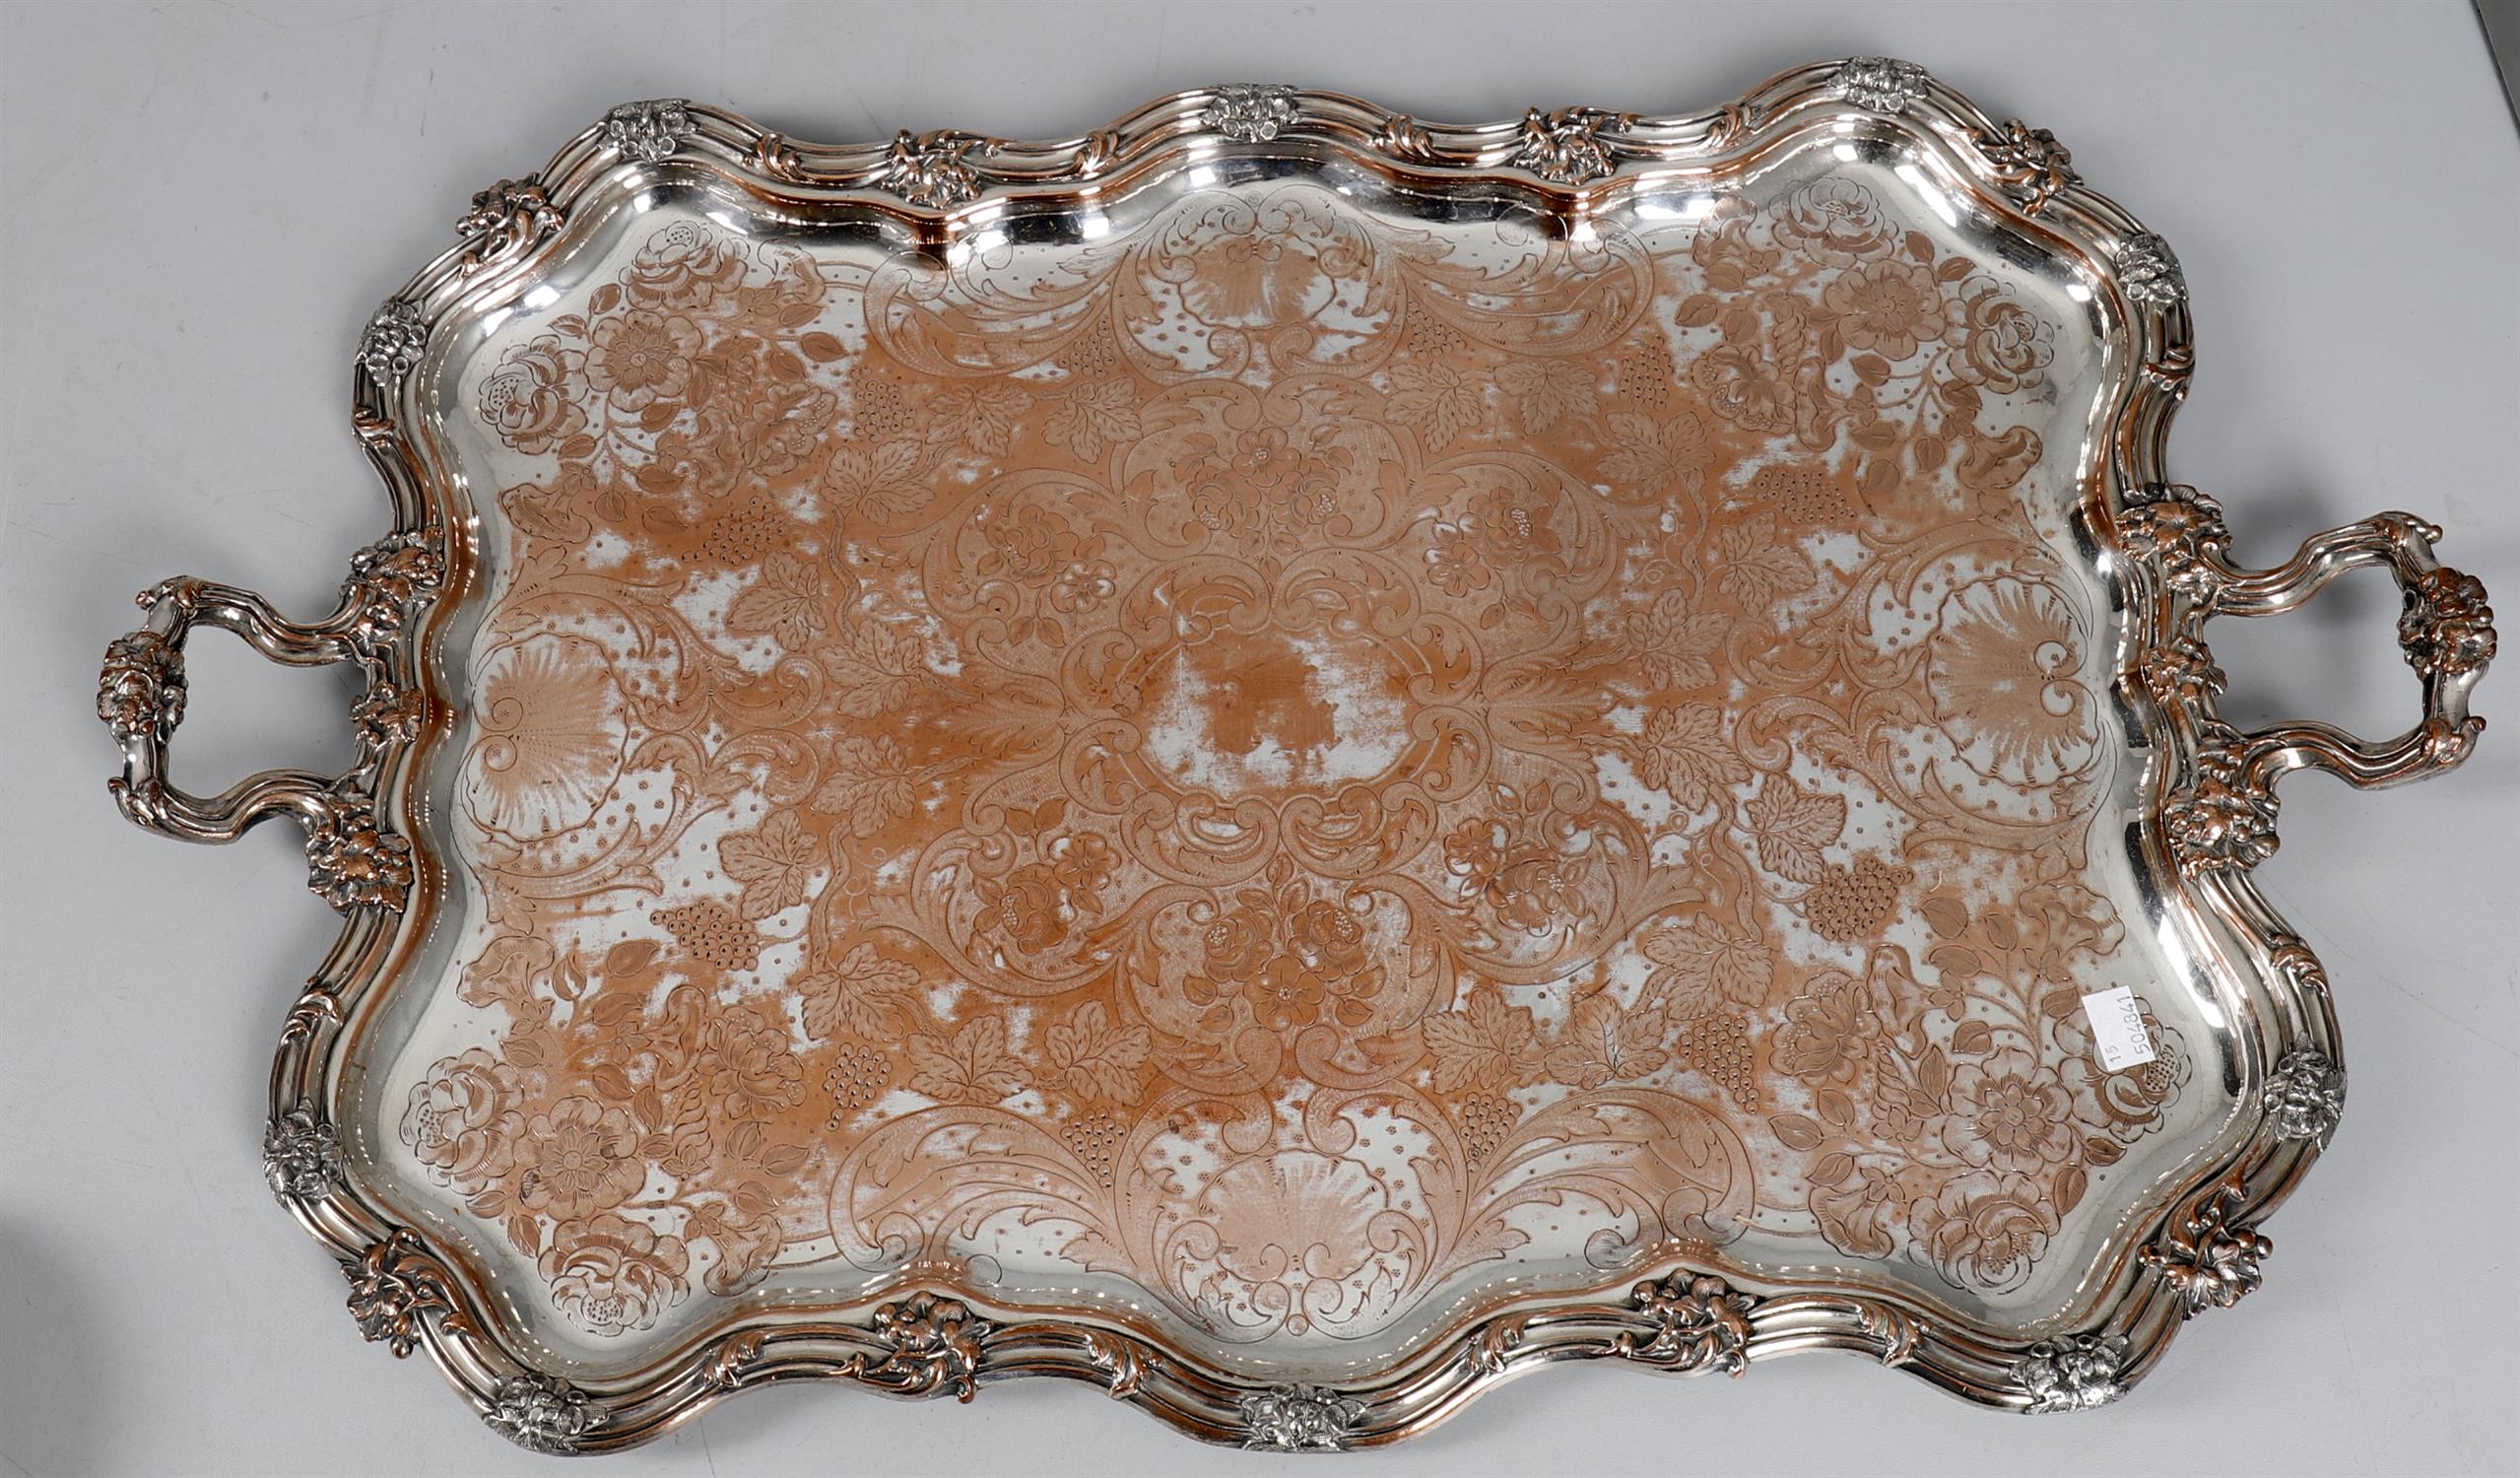 Silver plate including a large twin handled tray - Image 4 of 4